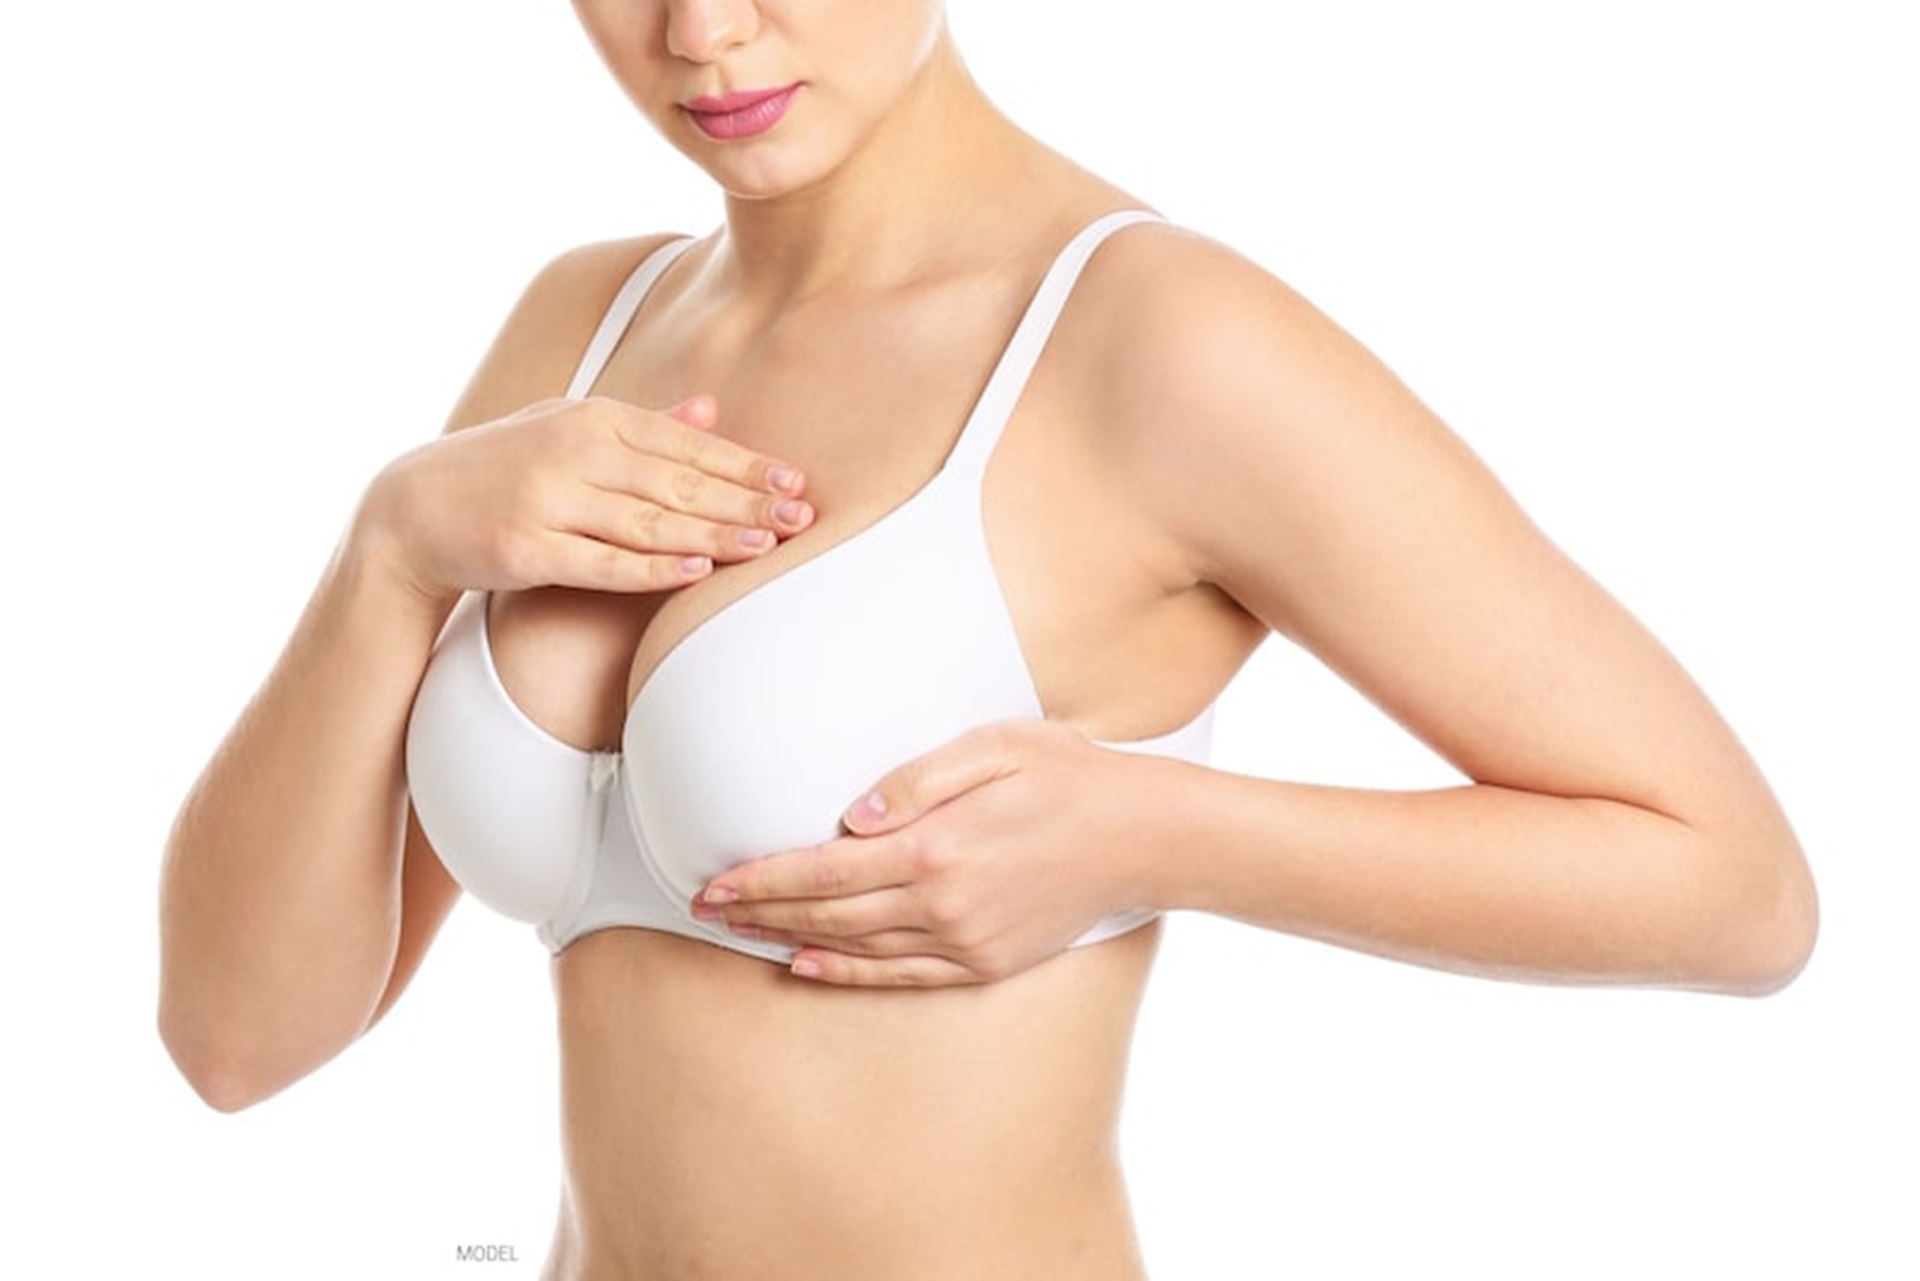 Breast Augmentation surgery image in Aberdeen, uk by Dr Jamil Ahmed